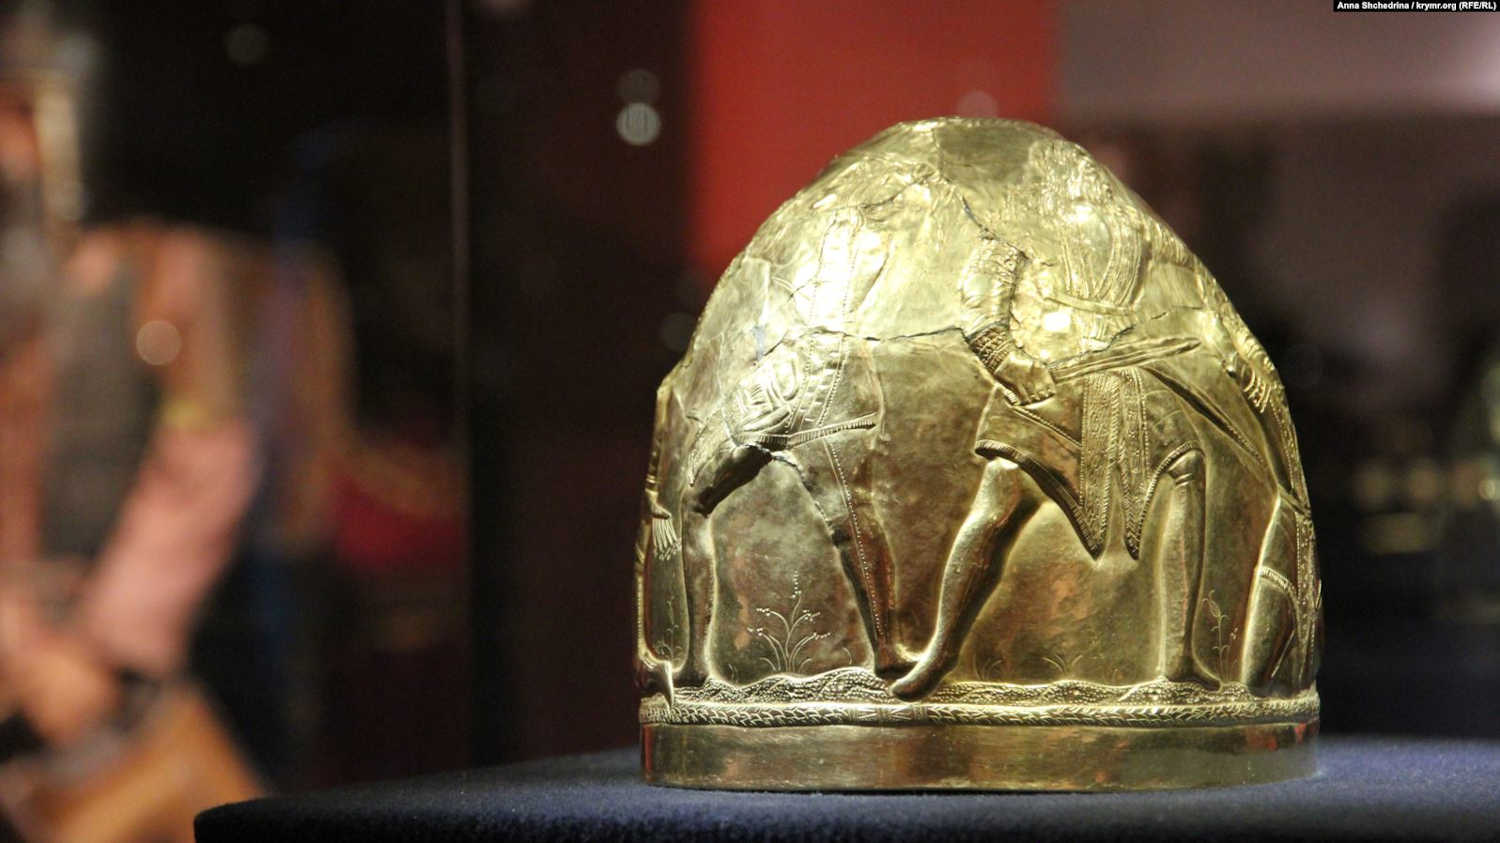 Russia wants Scythian gold, threatens Dutch judges with consequences 1